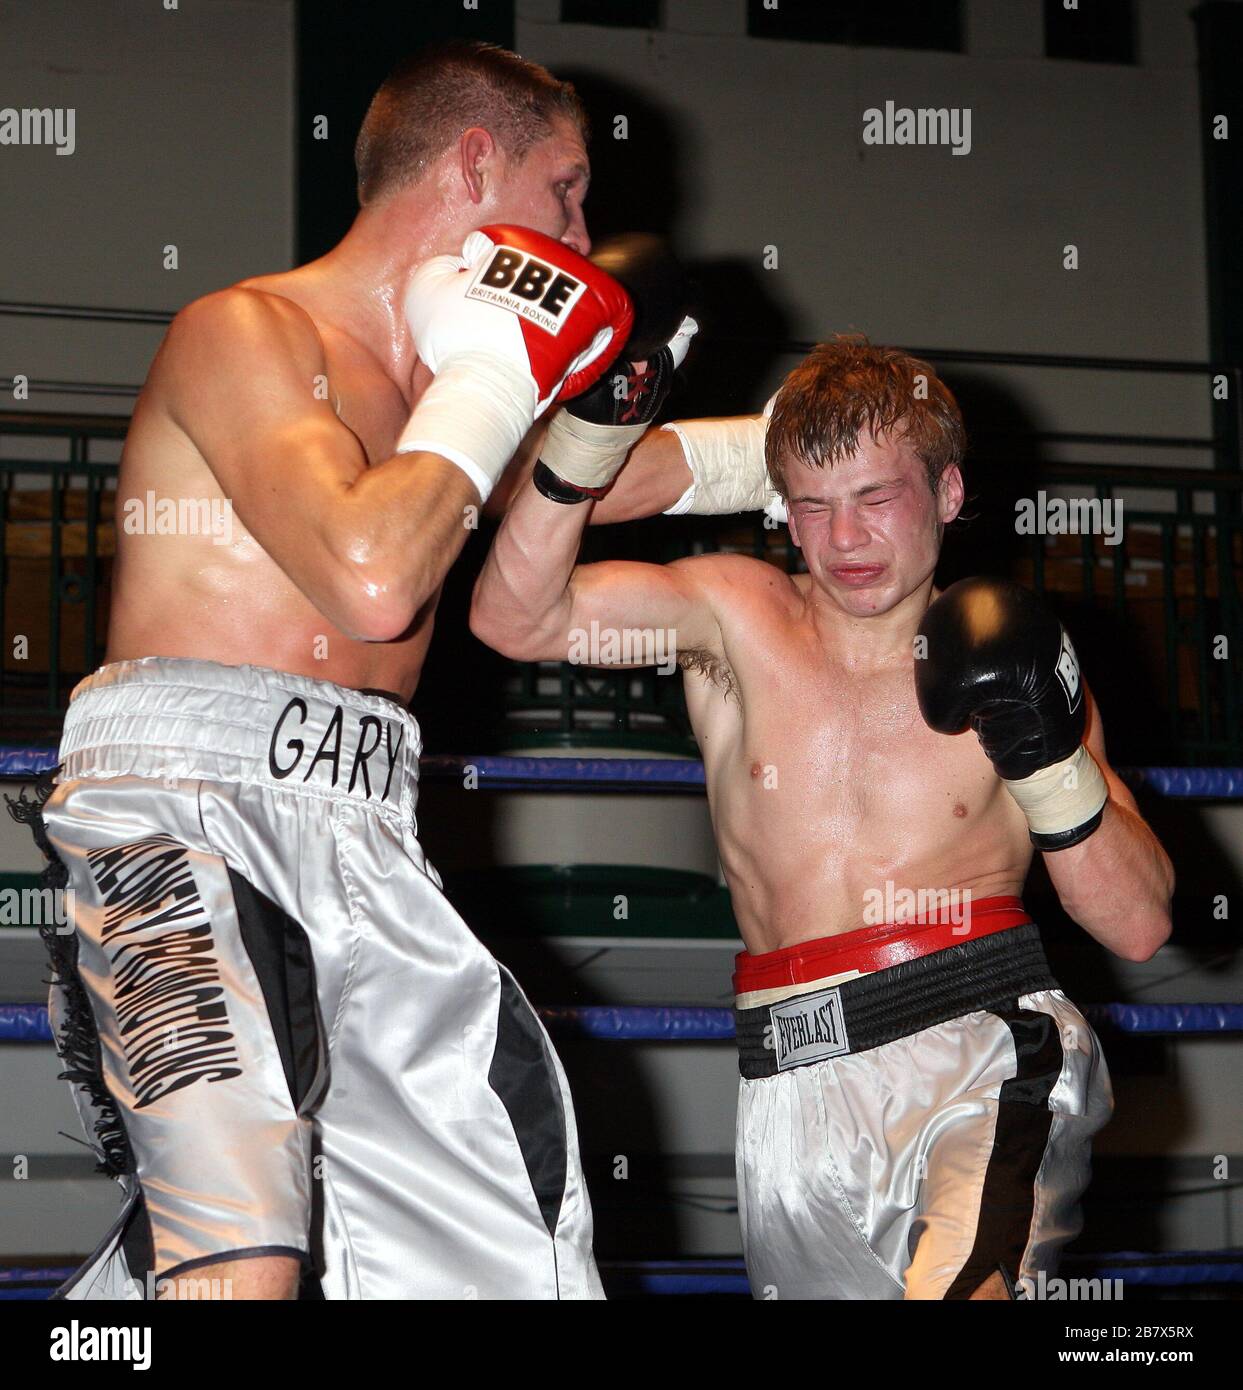 Gary Woolcombe (Bexleyheath, silver shorts) defeats Janis Chernouskis (Tukums, white shorts) in a LightMiddleweight boxing contest at York Hall Bethna Stock Photo